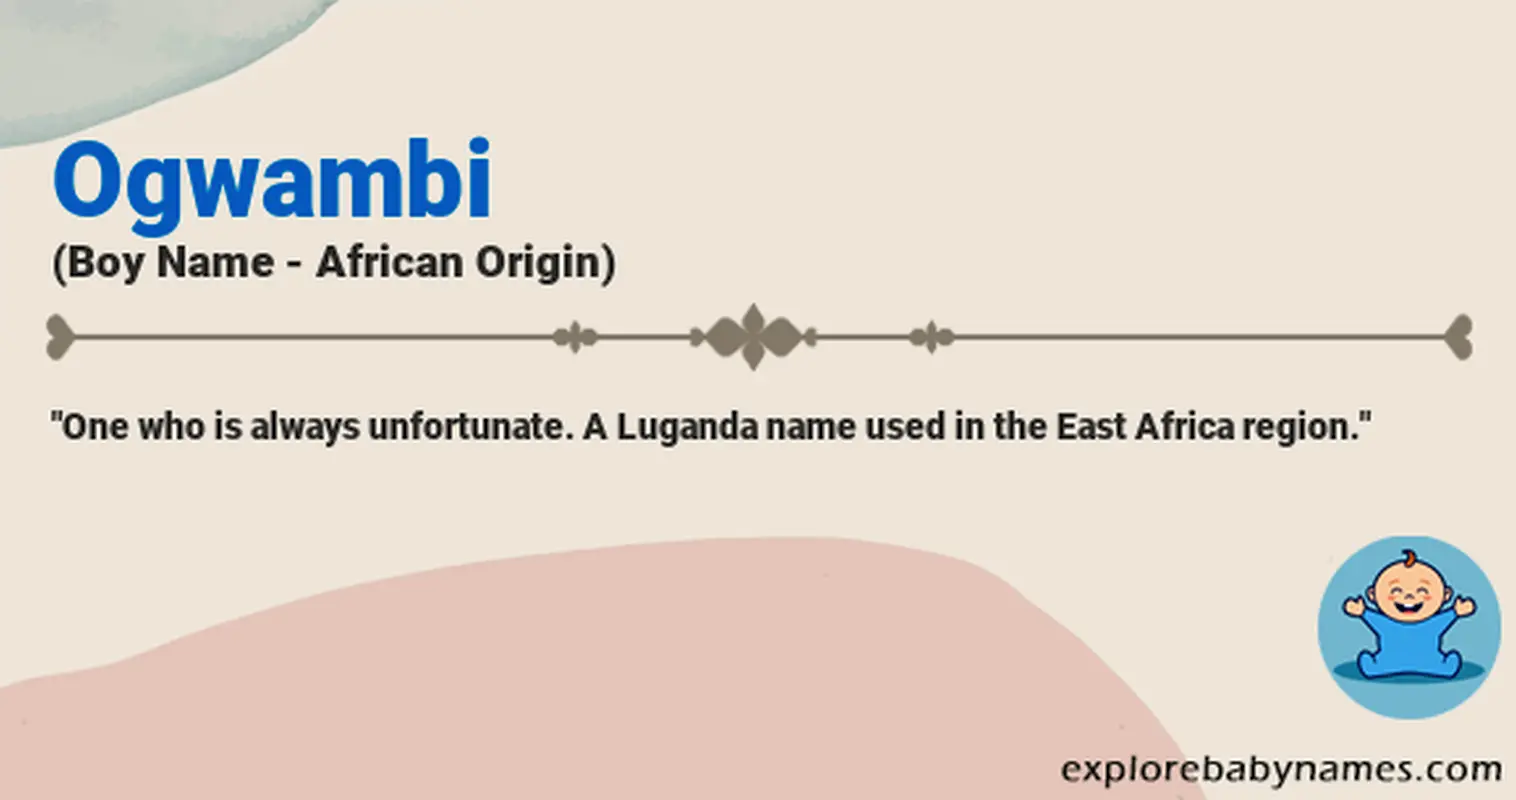 Meaning of Ogwambi